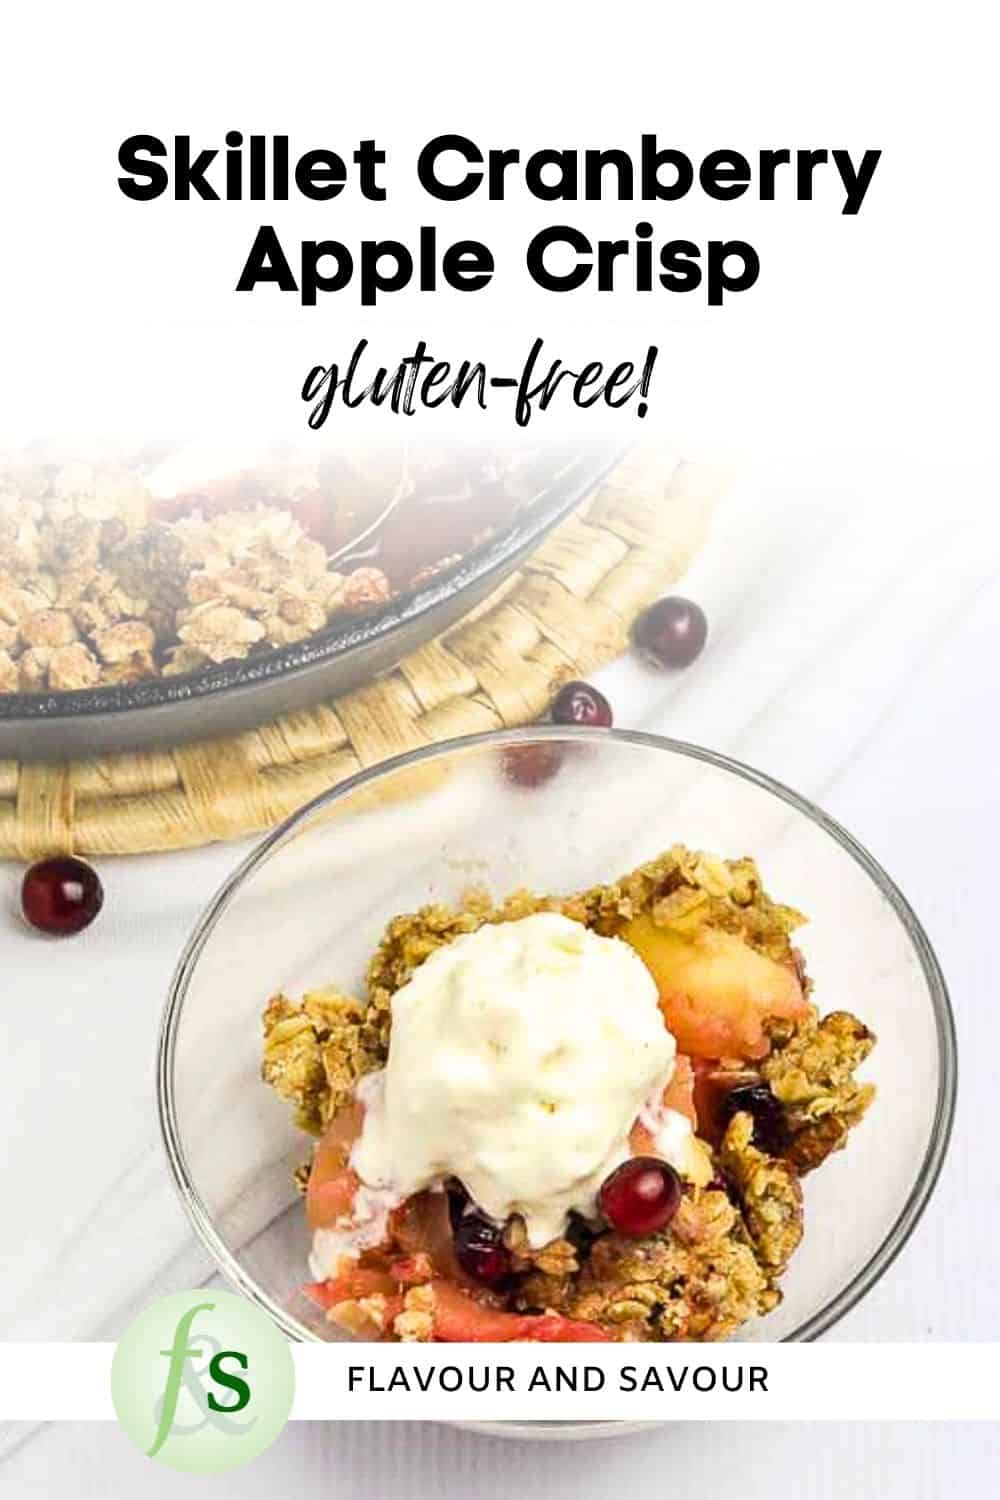 Image with text overlay for skillet apple cranberry crisp.